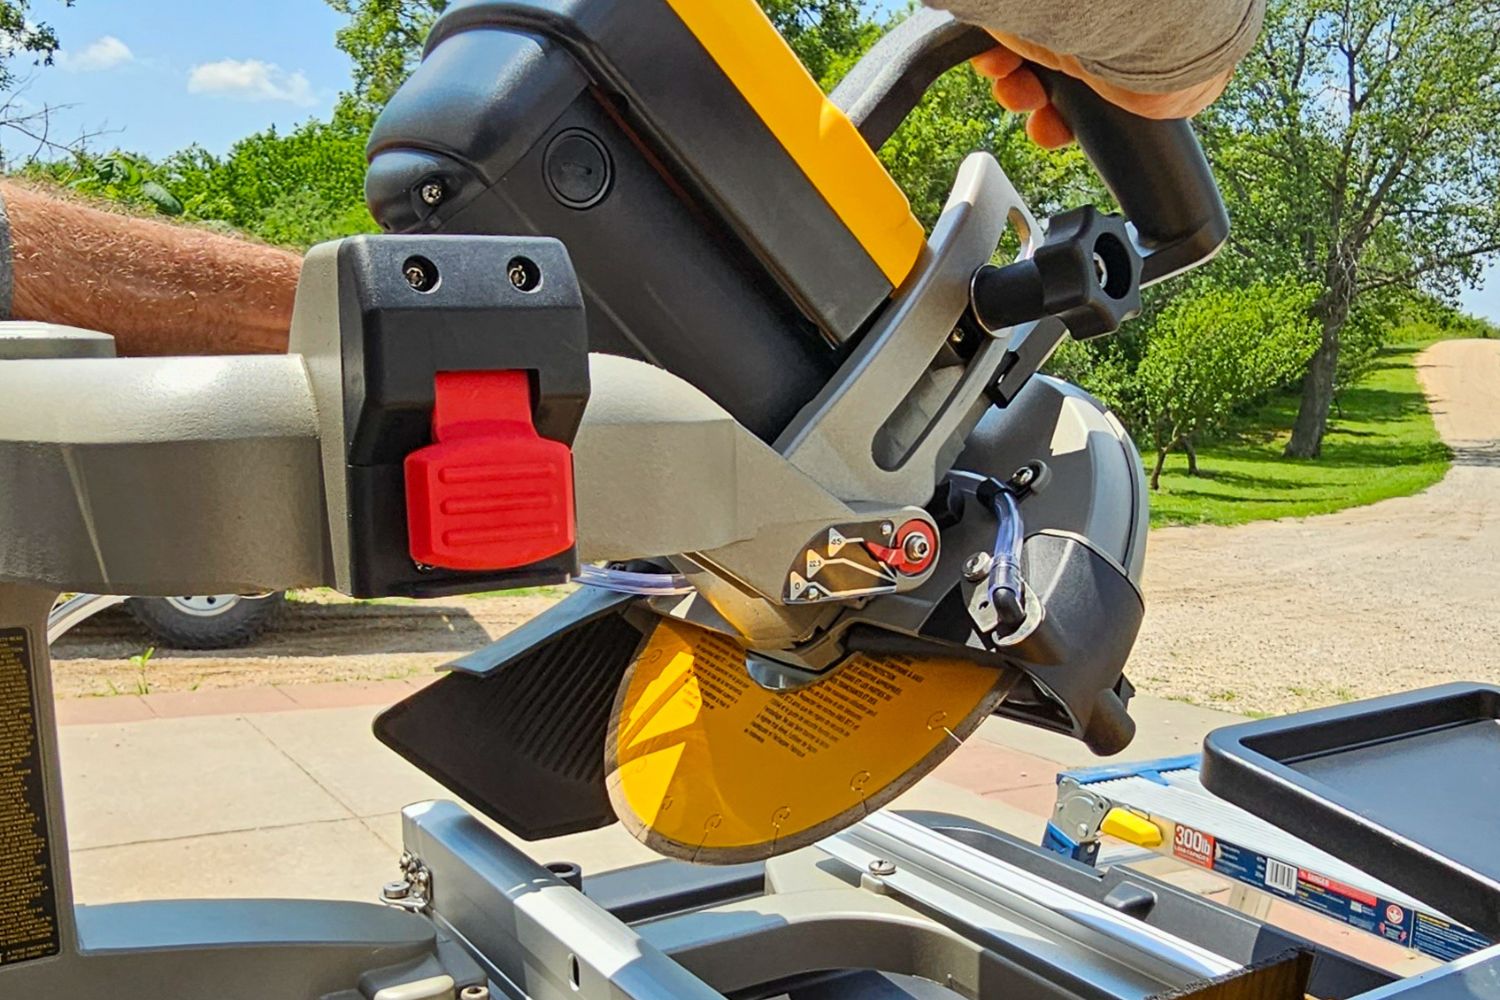 The DeWalt 10-inch wet tile saw set up to cut at a 45-degree angle